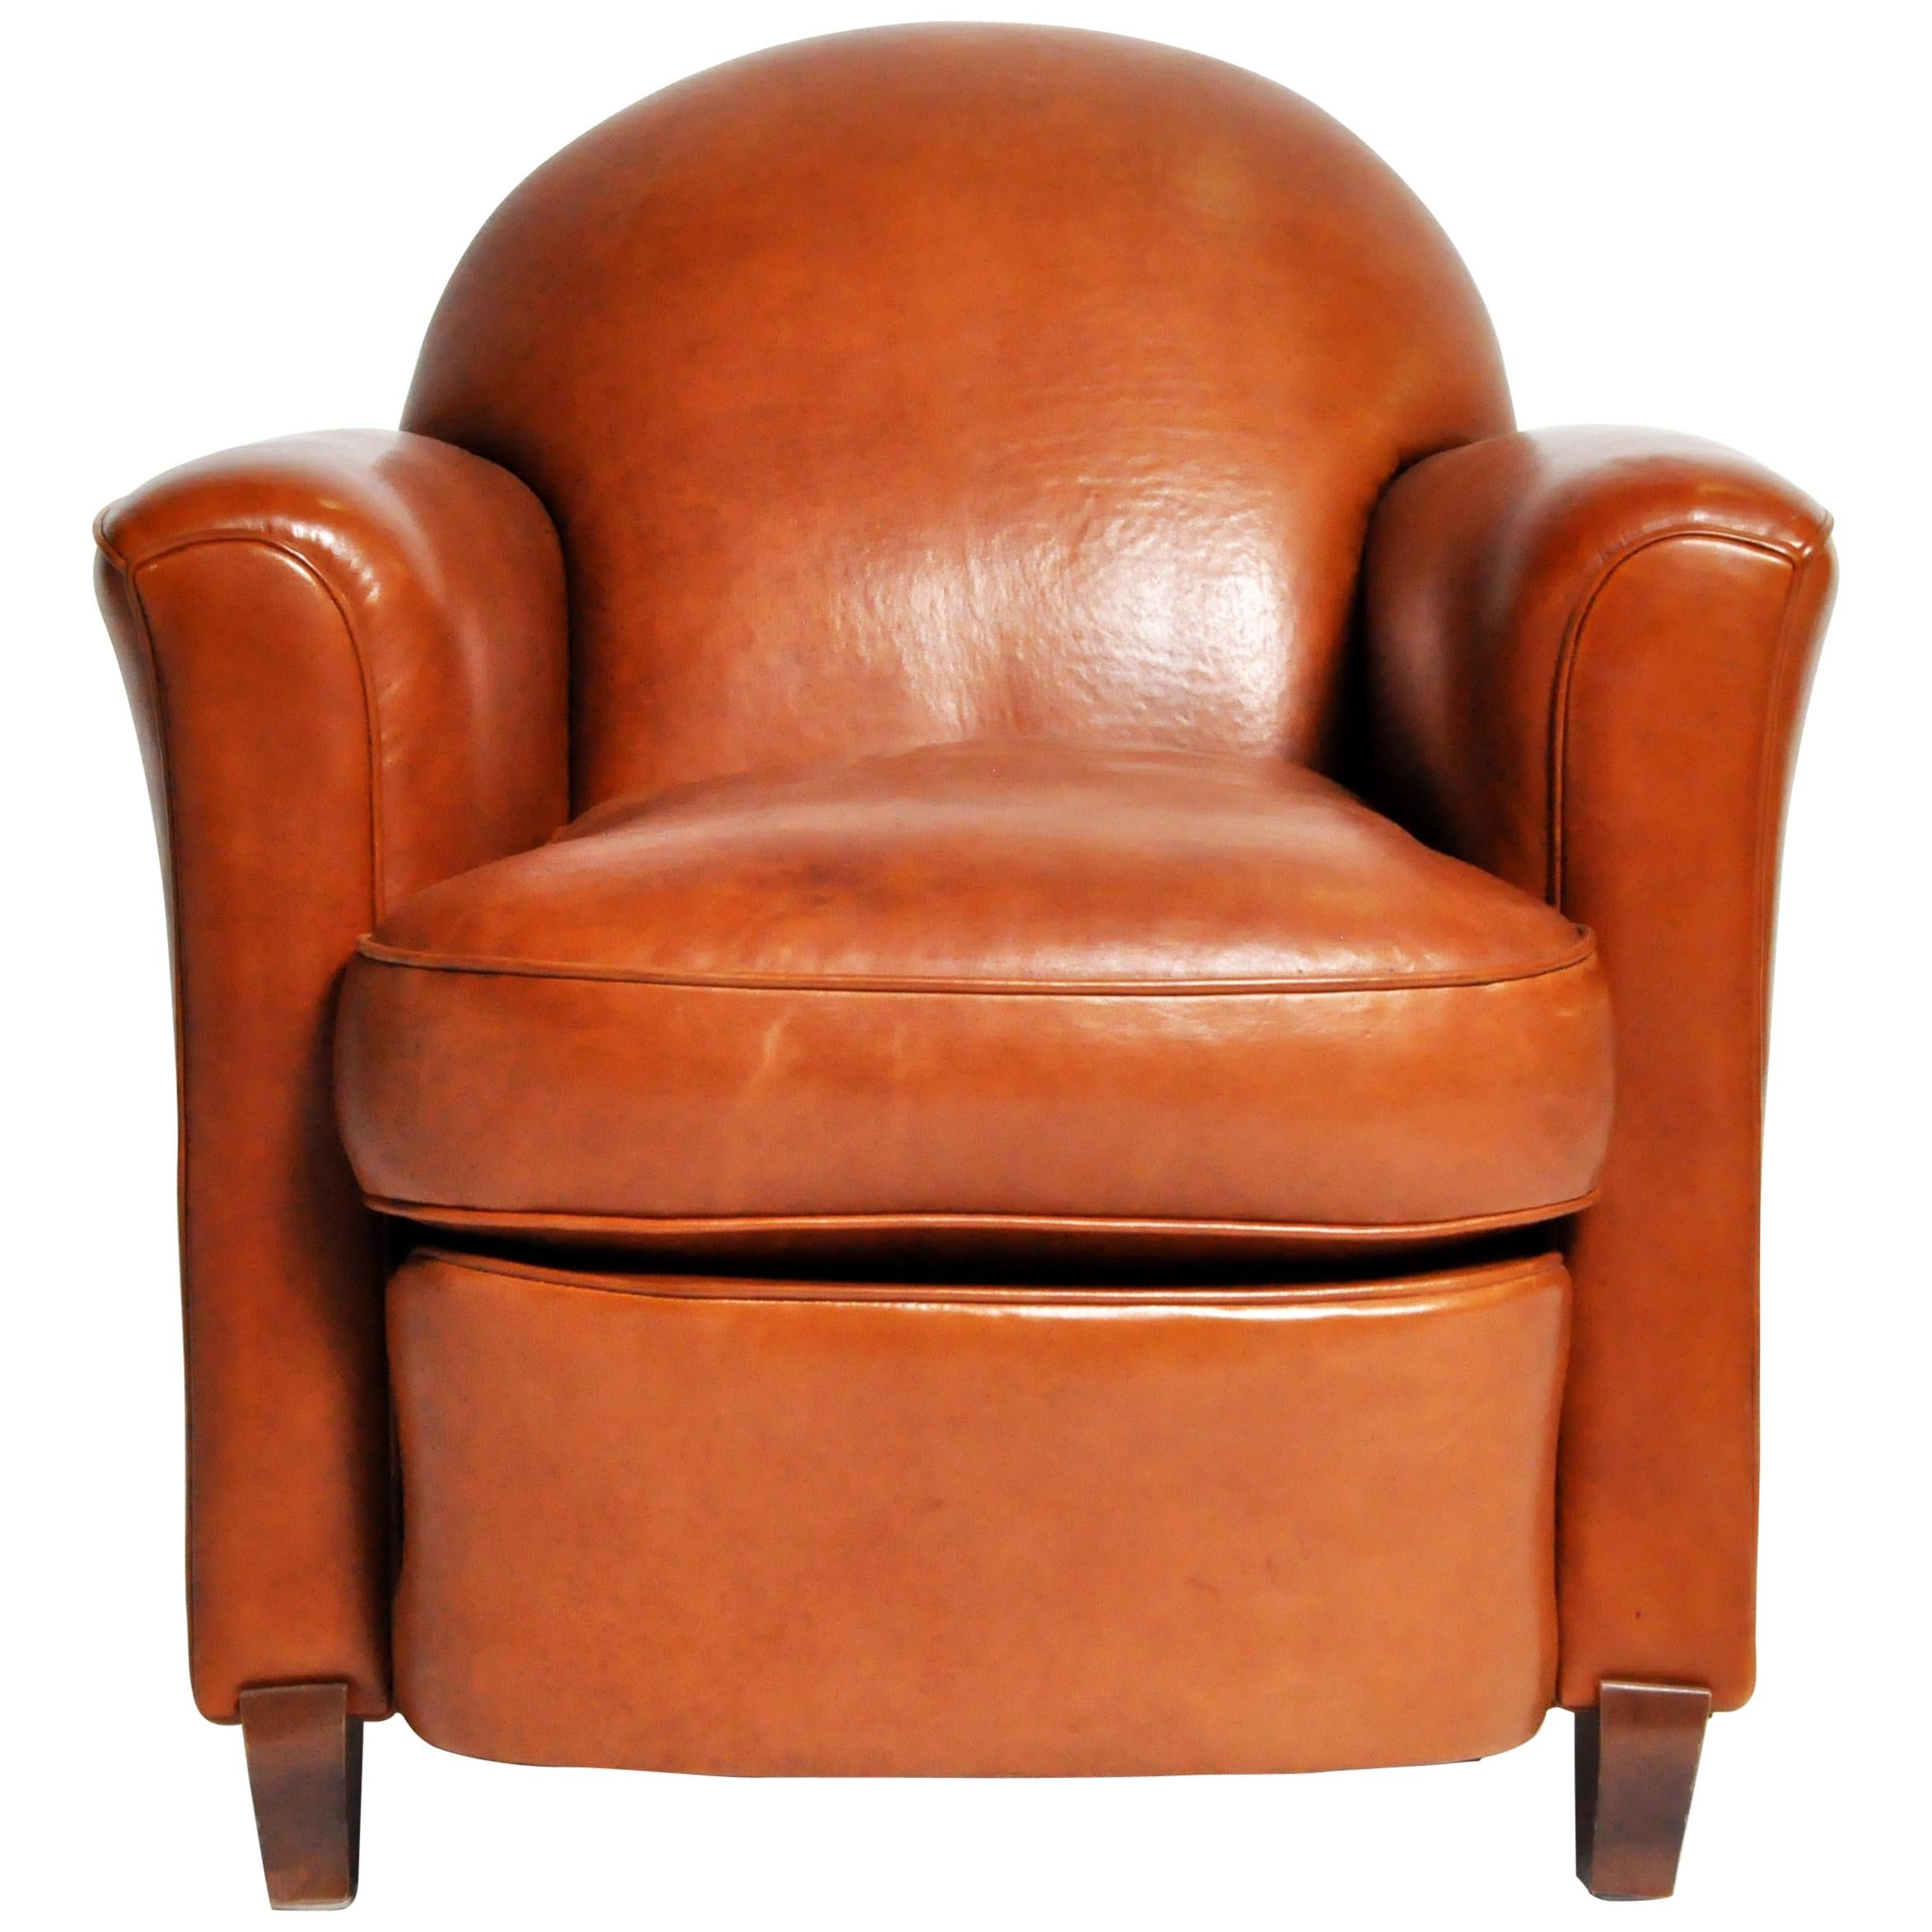 Art Deco French Leather Armchair, circa 1940